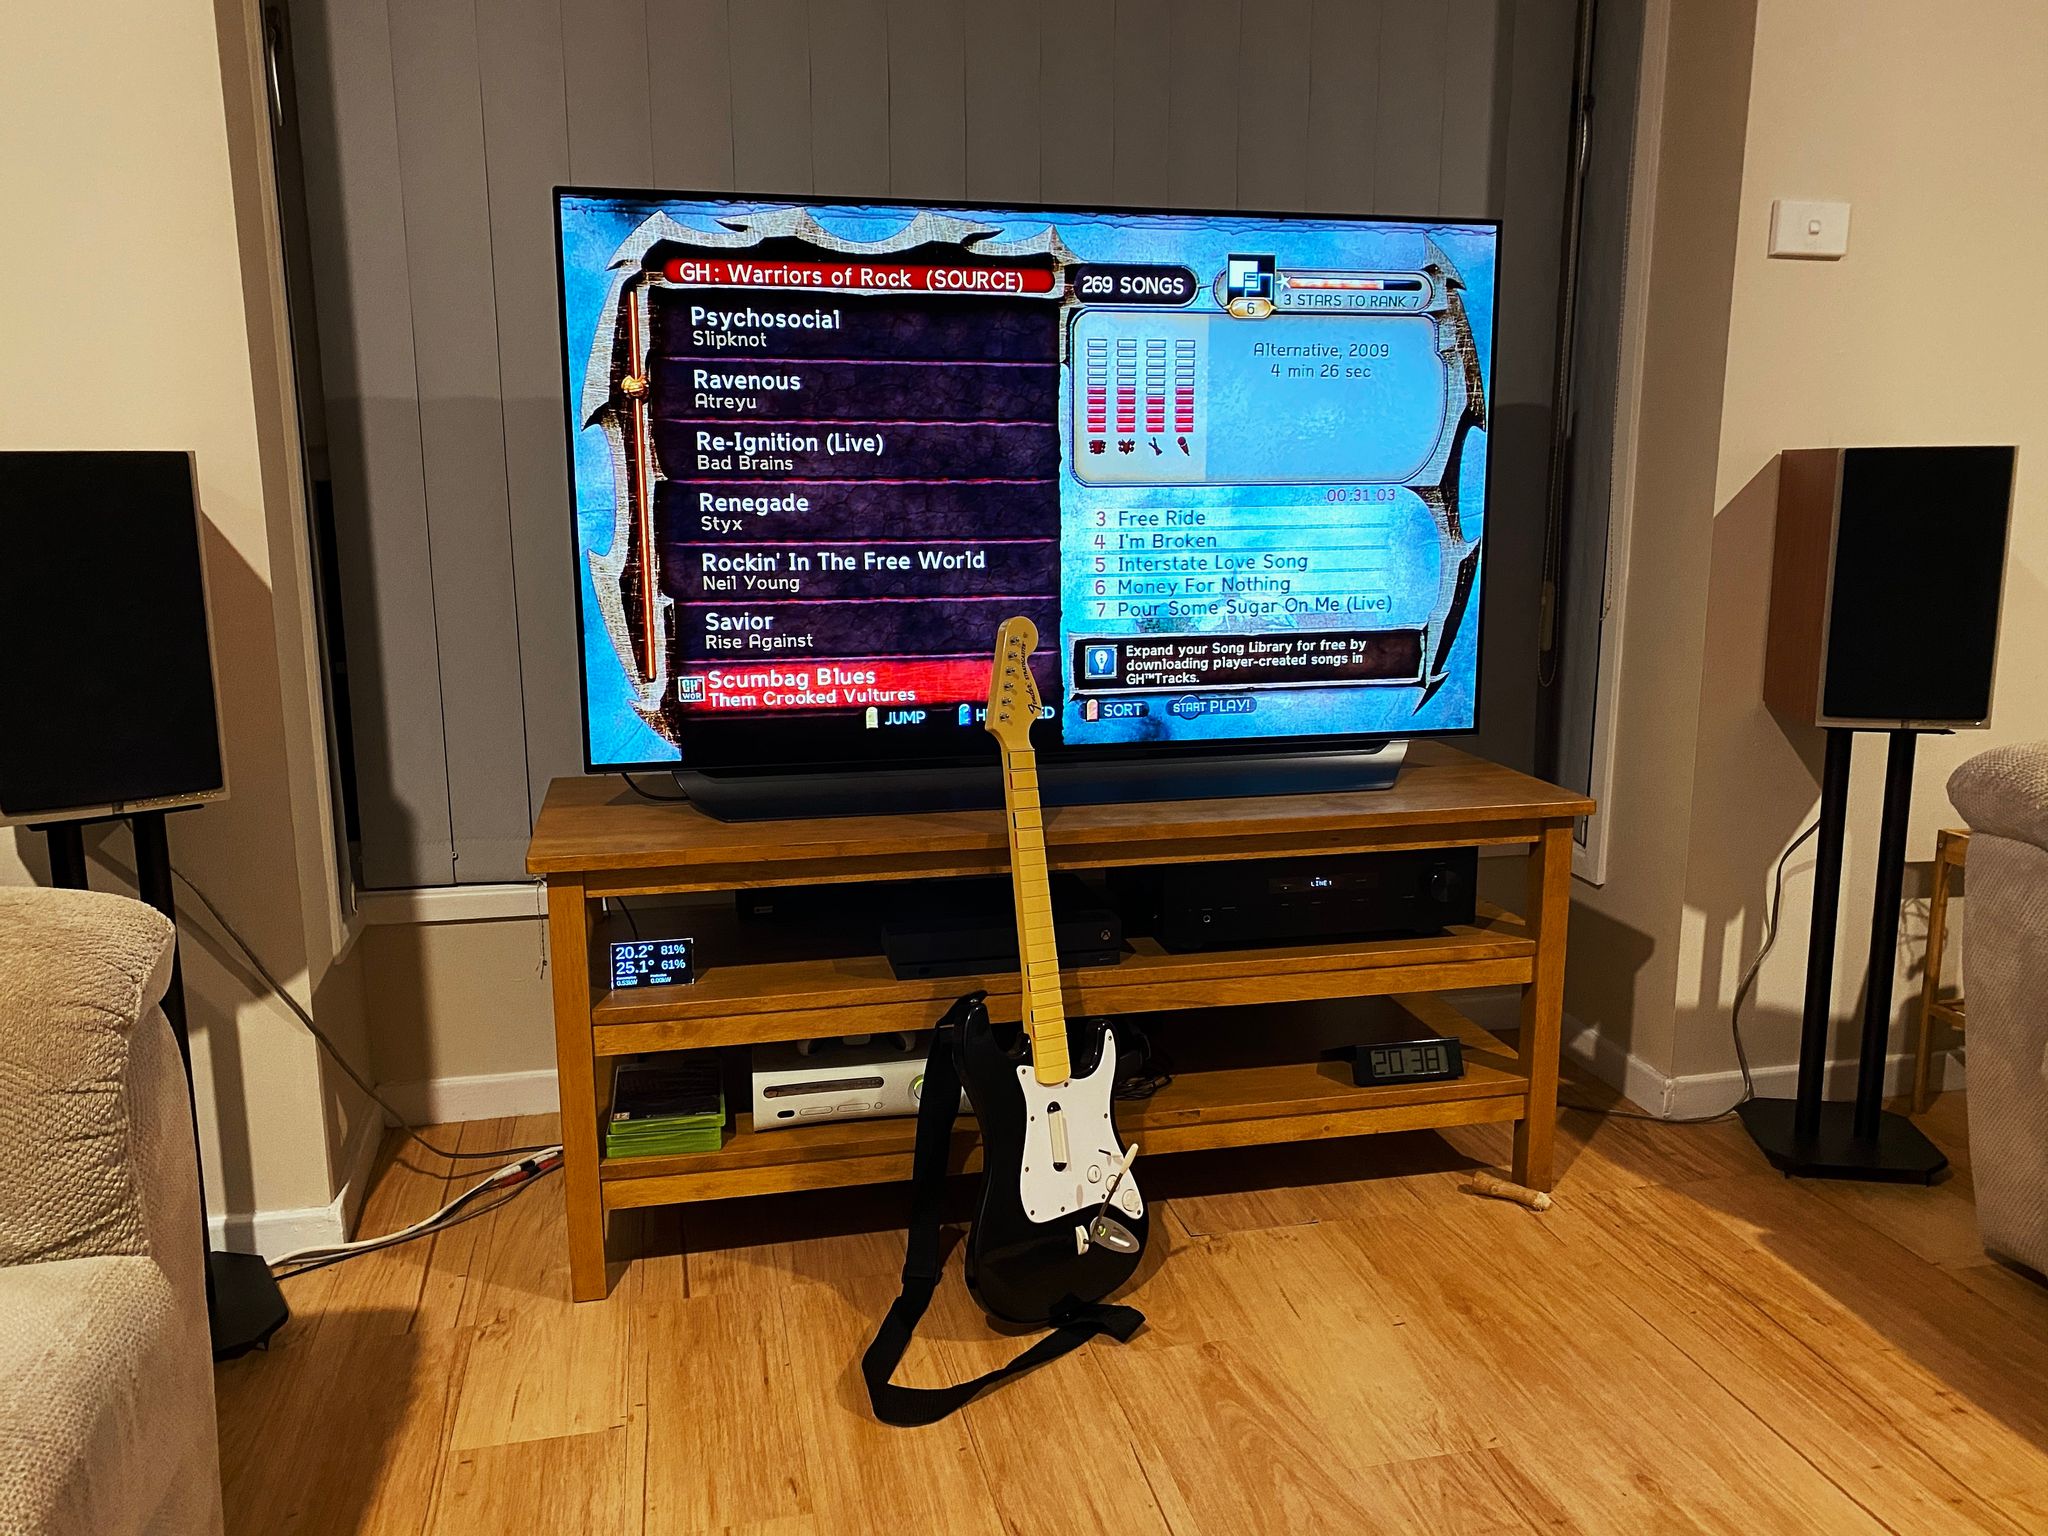 A photo of our lounge room, showing Guitar Hero: Warriors of Rock on the TV, and one of the guitar controllers sitting in front of it.